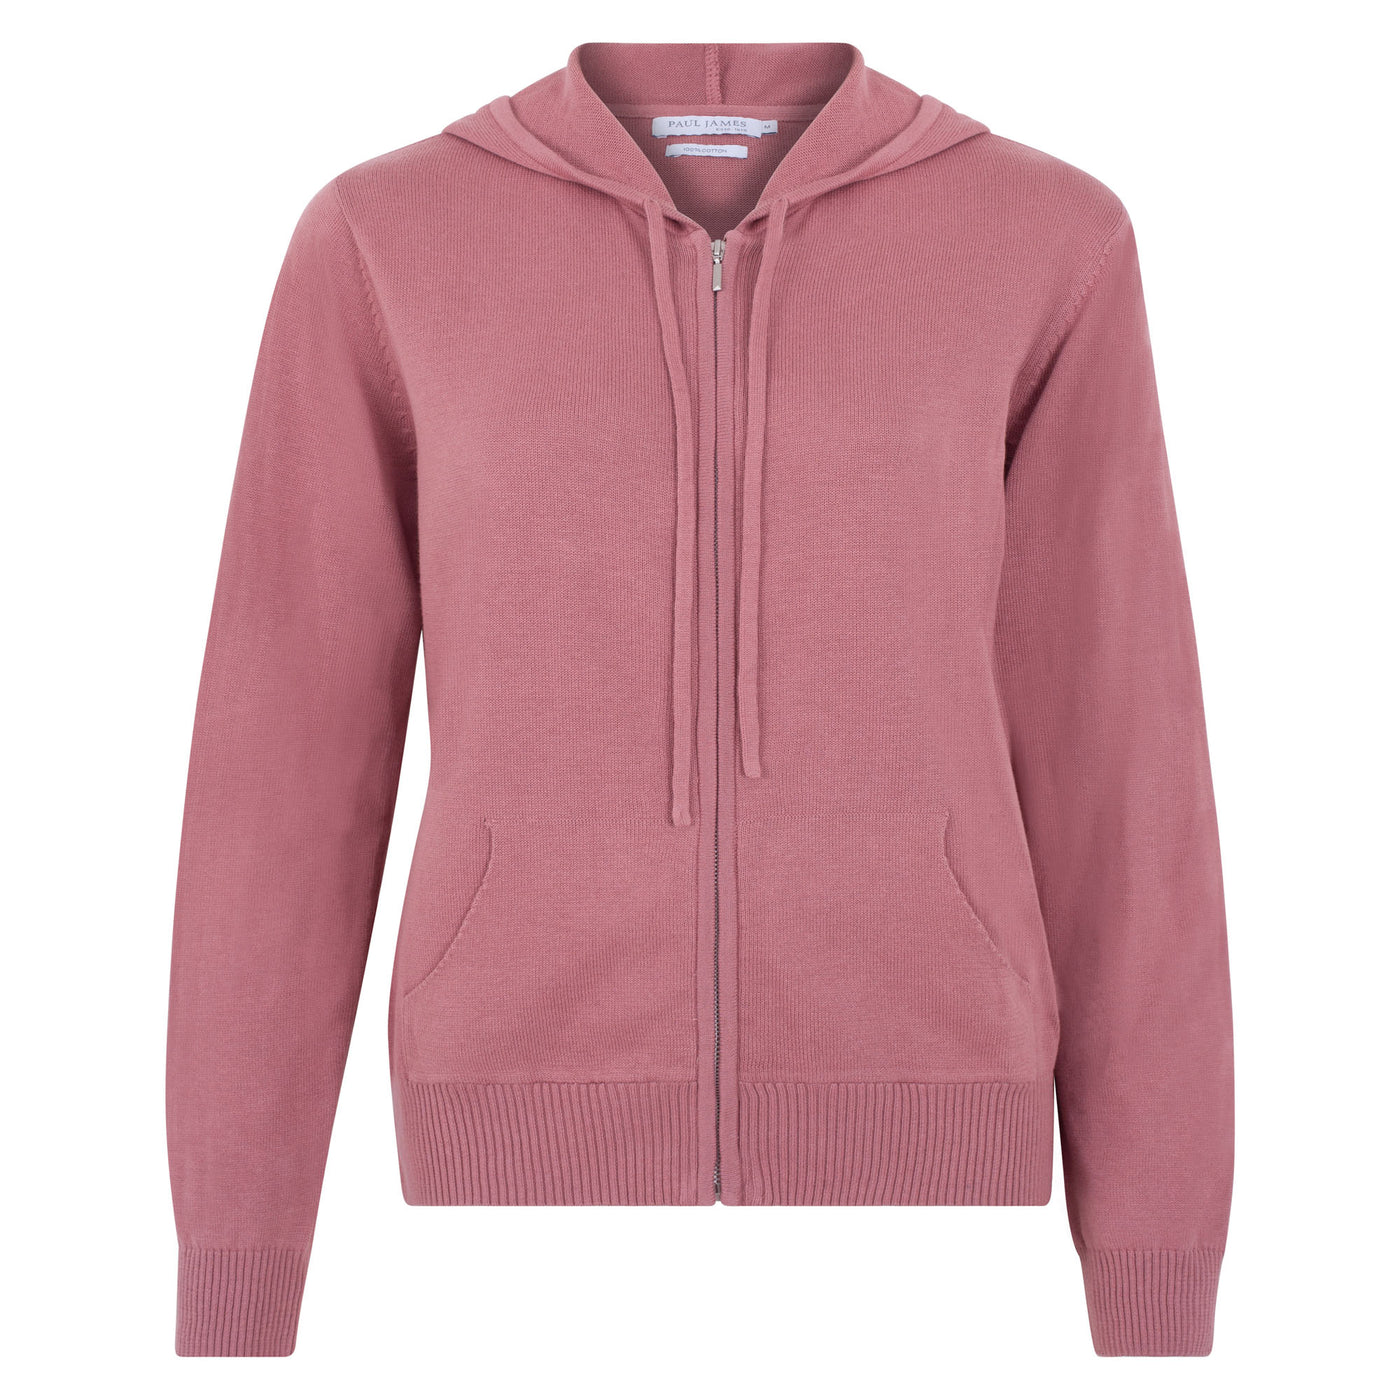 pink womens zip up hooded sweater